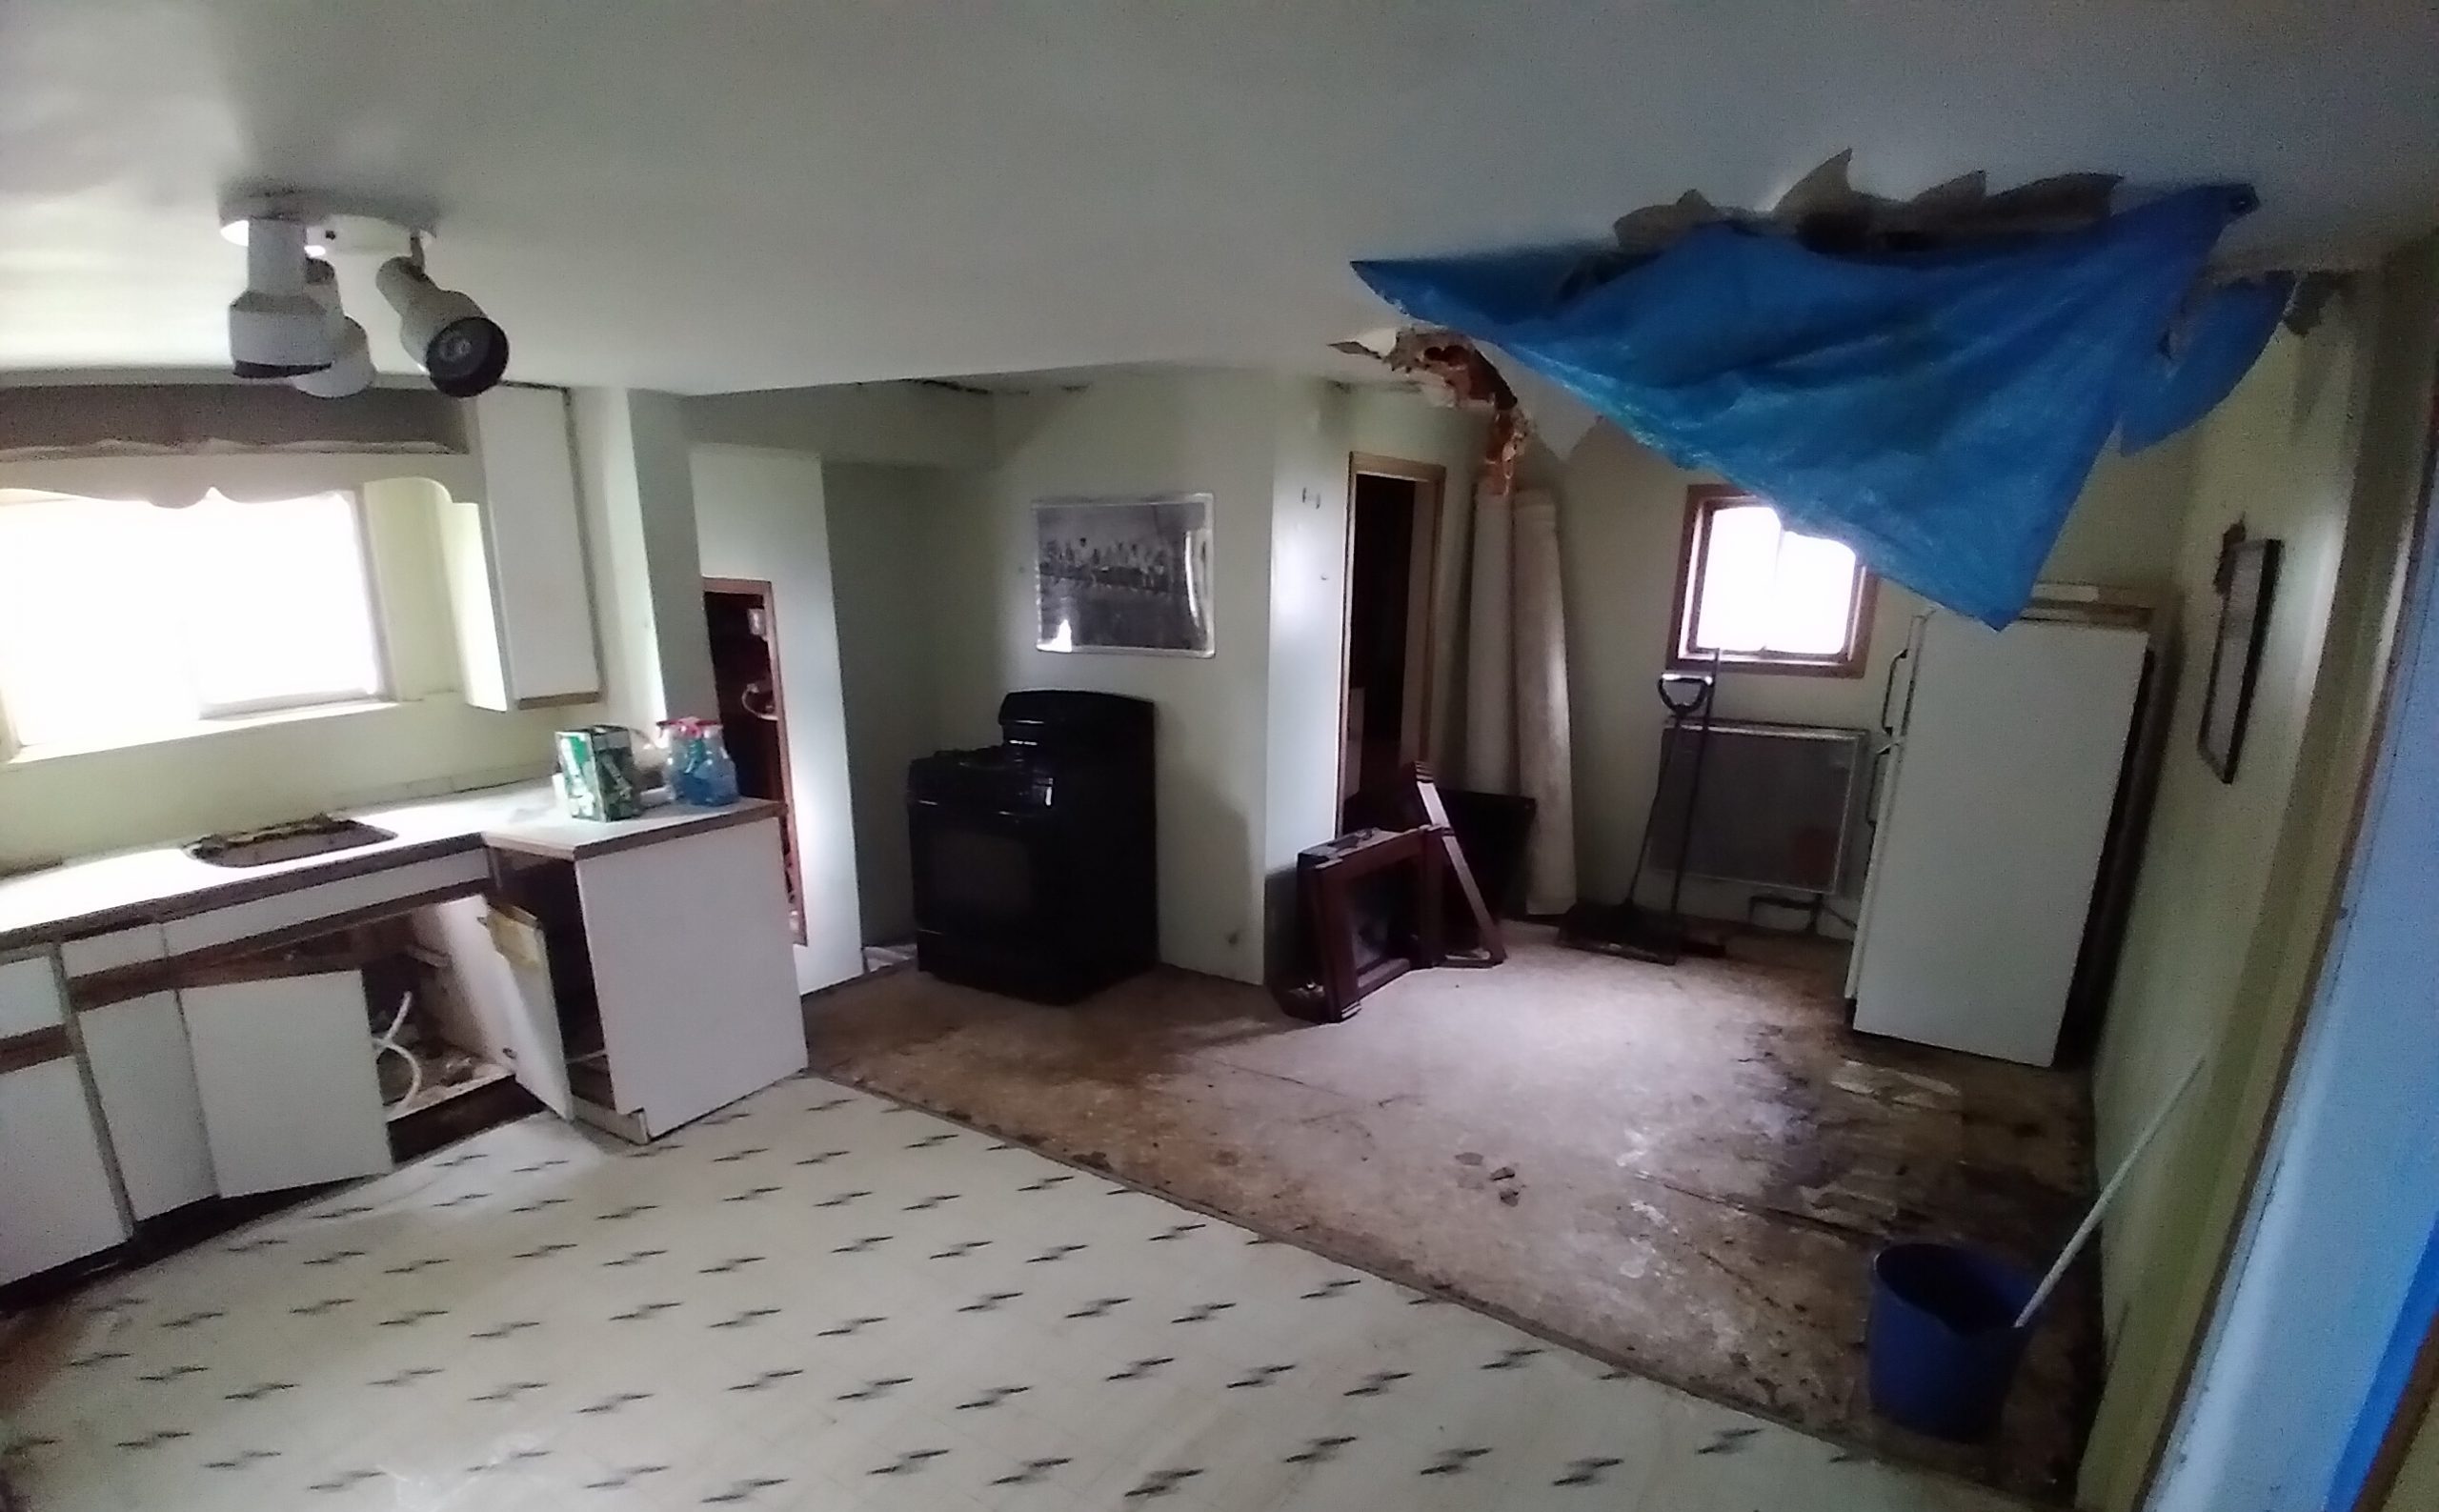 kitchen in condemned home before cash home buyer transformed it for resale